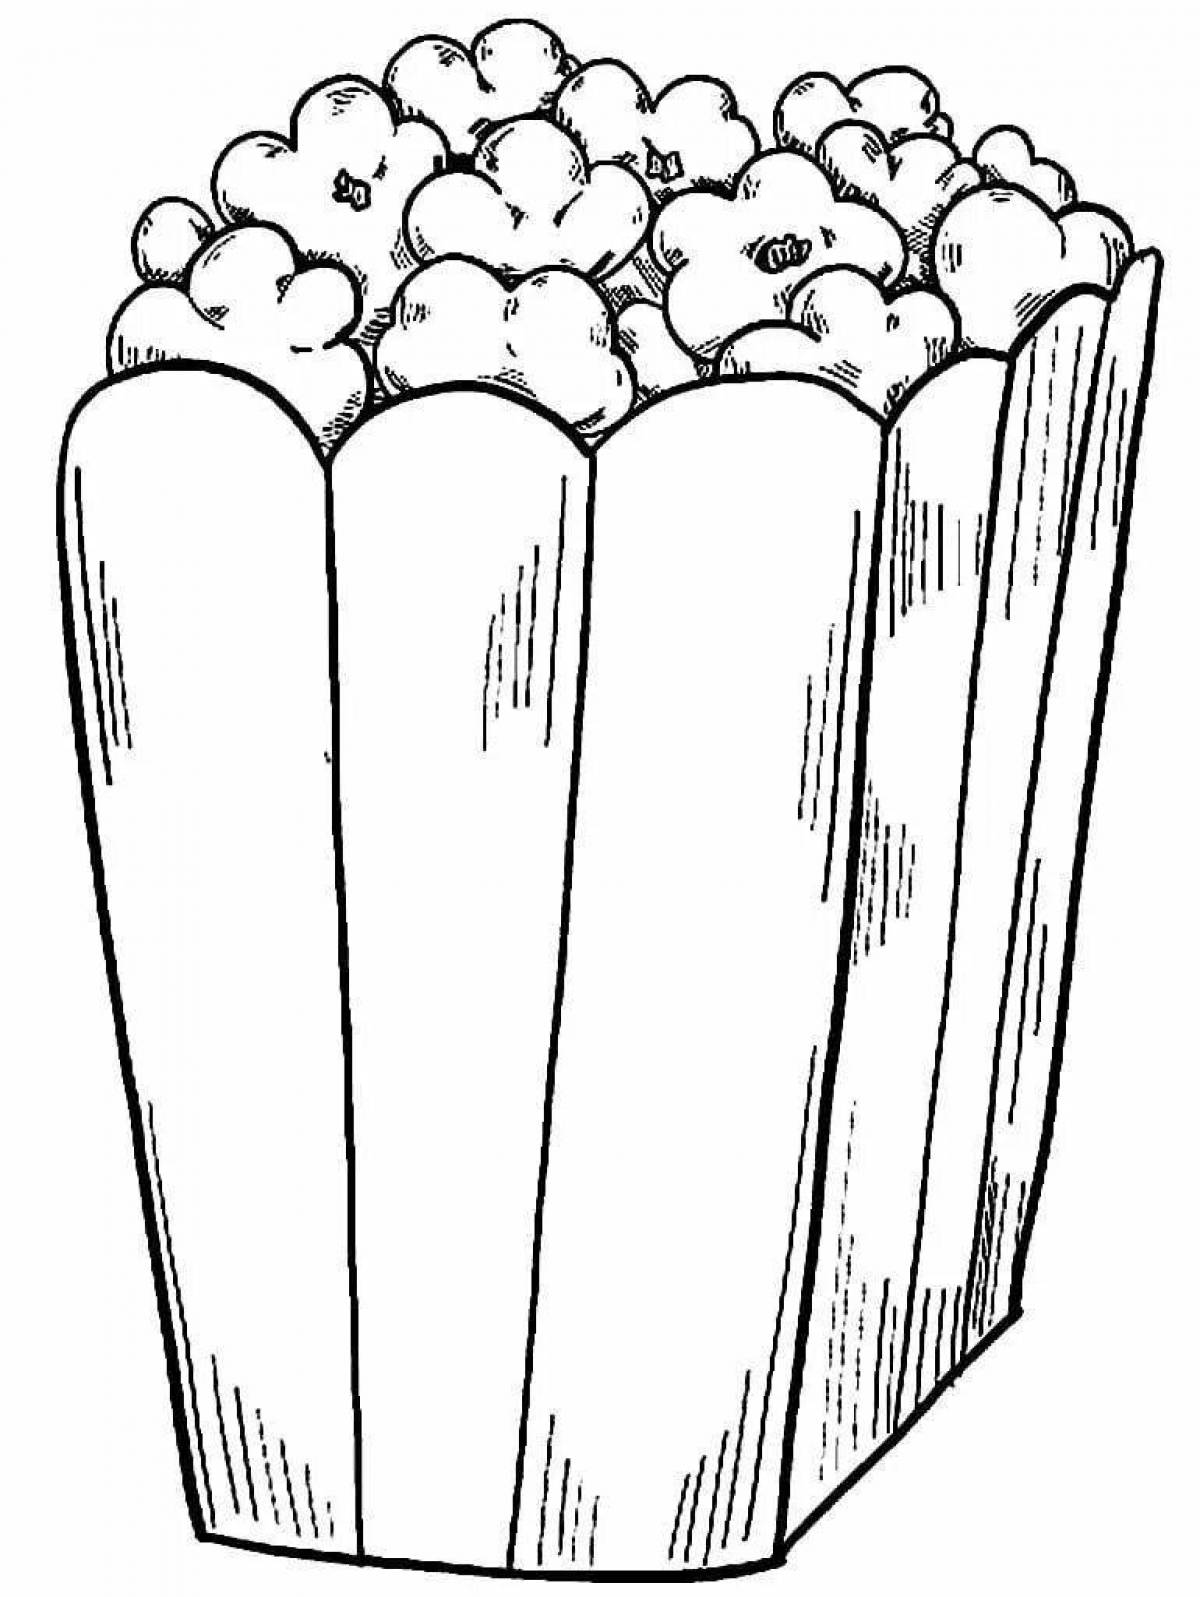 Animated popcorn coloring book for kids